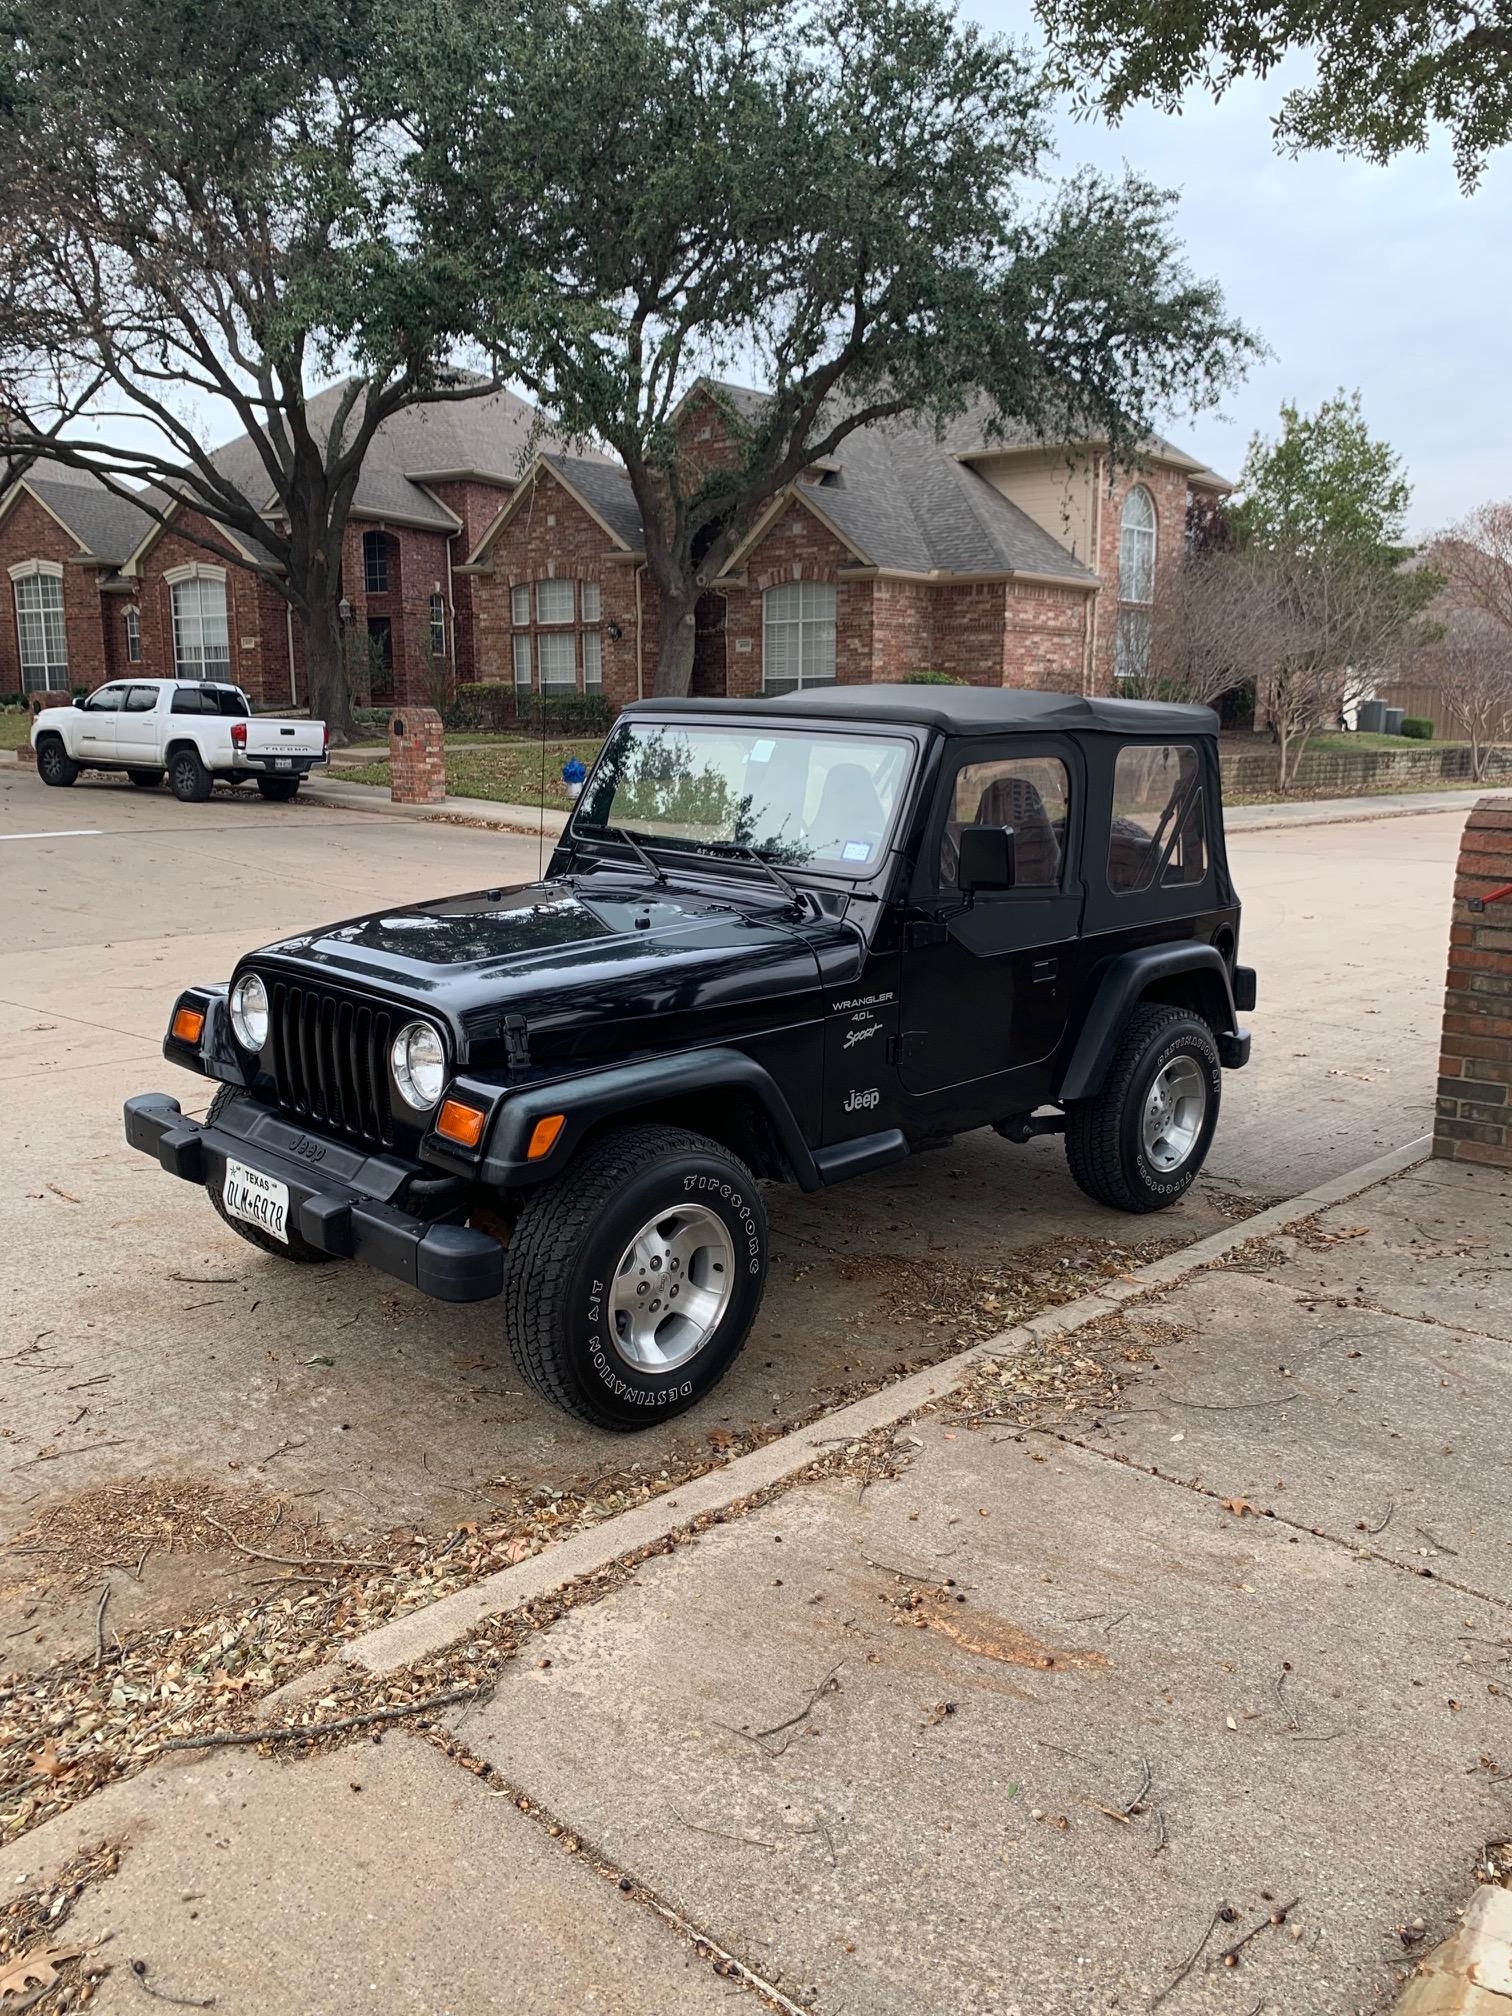 This 1999 Jeep Wrangler Is a One-Owner Gem With Low Miles - autoevolution